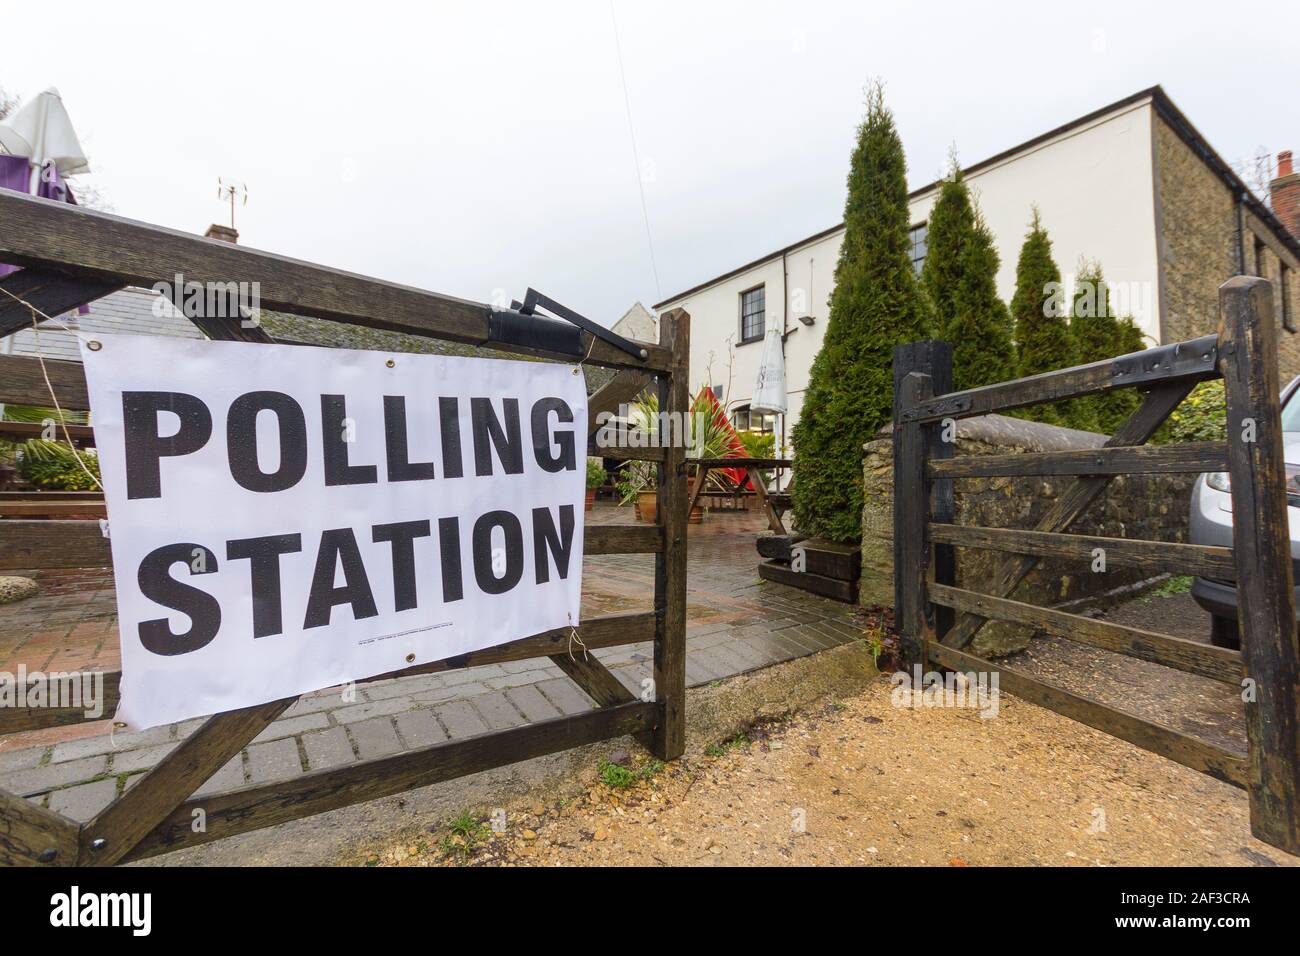 Stroud, UK. 12 Dec, 2019. The smallest polling station in the Stroud constituency is within a pub, The Frocester George with an electorate of just 135. Credit: Carl Hewlett/Alamy Live News. Stock Photo